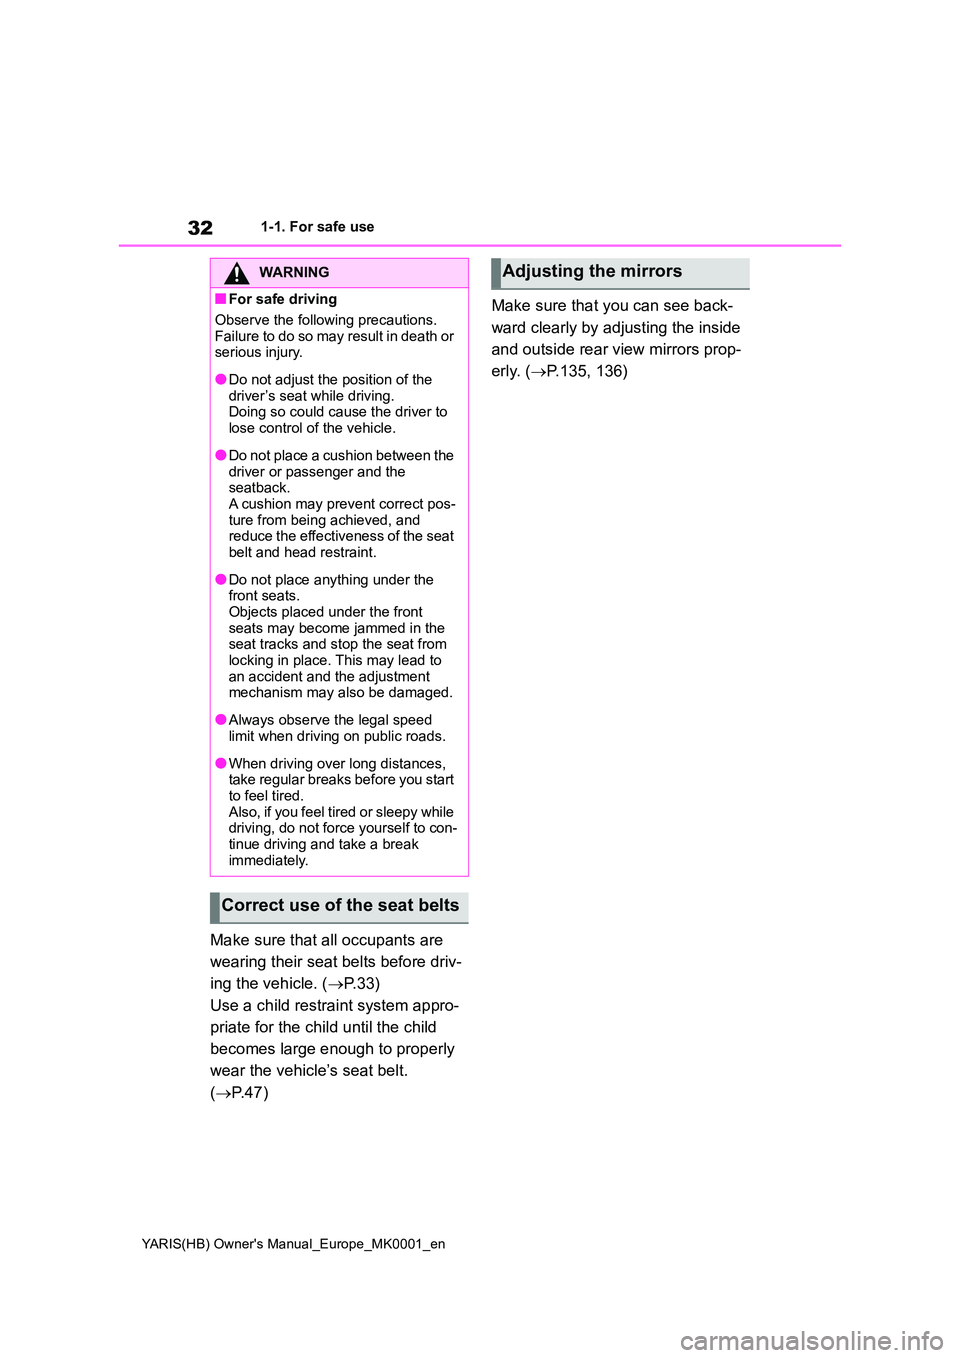 TOYOTA YARIS 2021  Owners Manual 32
YARIS(HB) Owners Manual_Europe_MK0001_en
1-1. For safe use
Make sure that all occupants are  
wearing their seat belts before driv- 
ing the vehicle. ( →P.33) 
Use a child restraint system appro